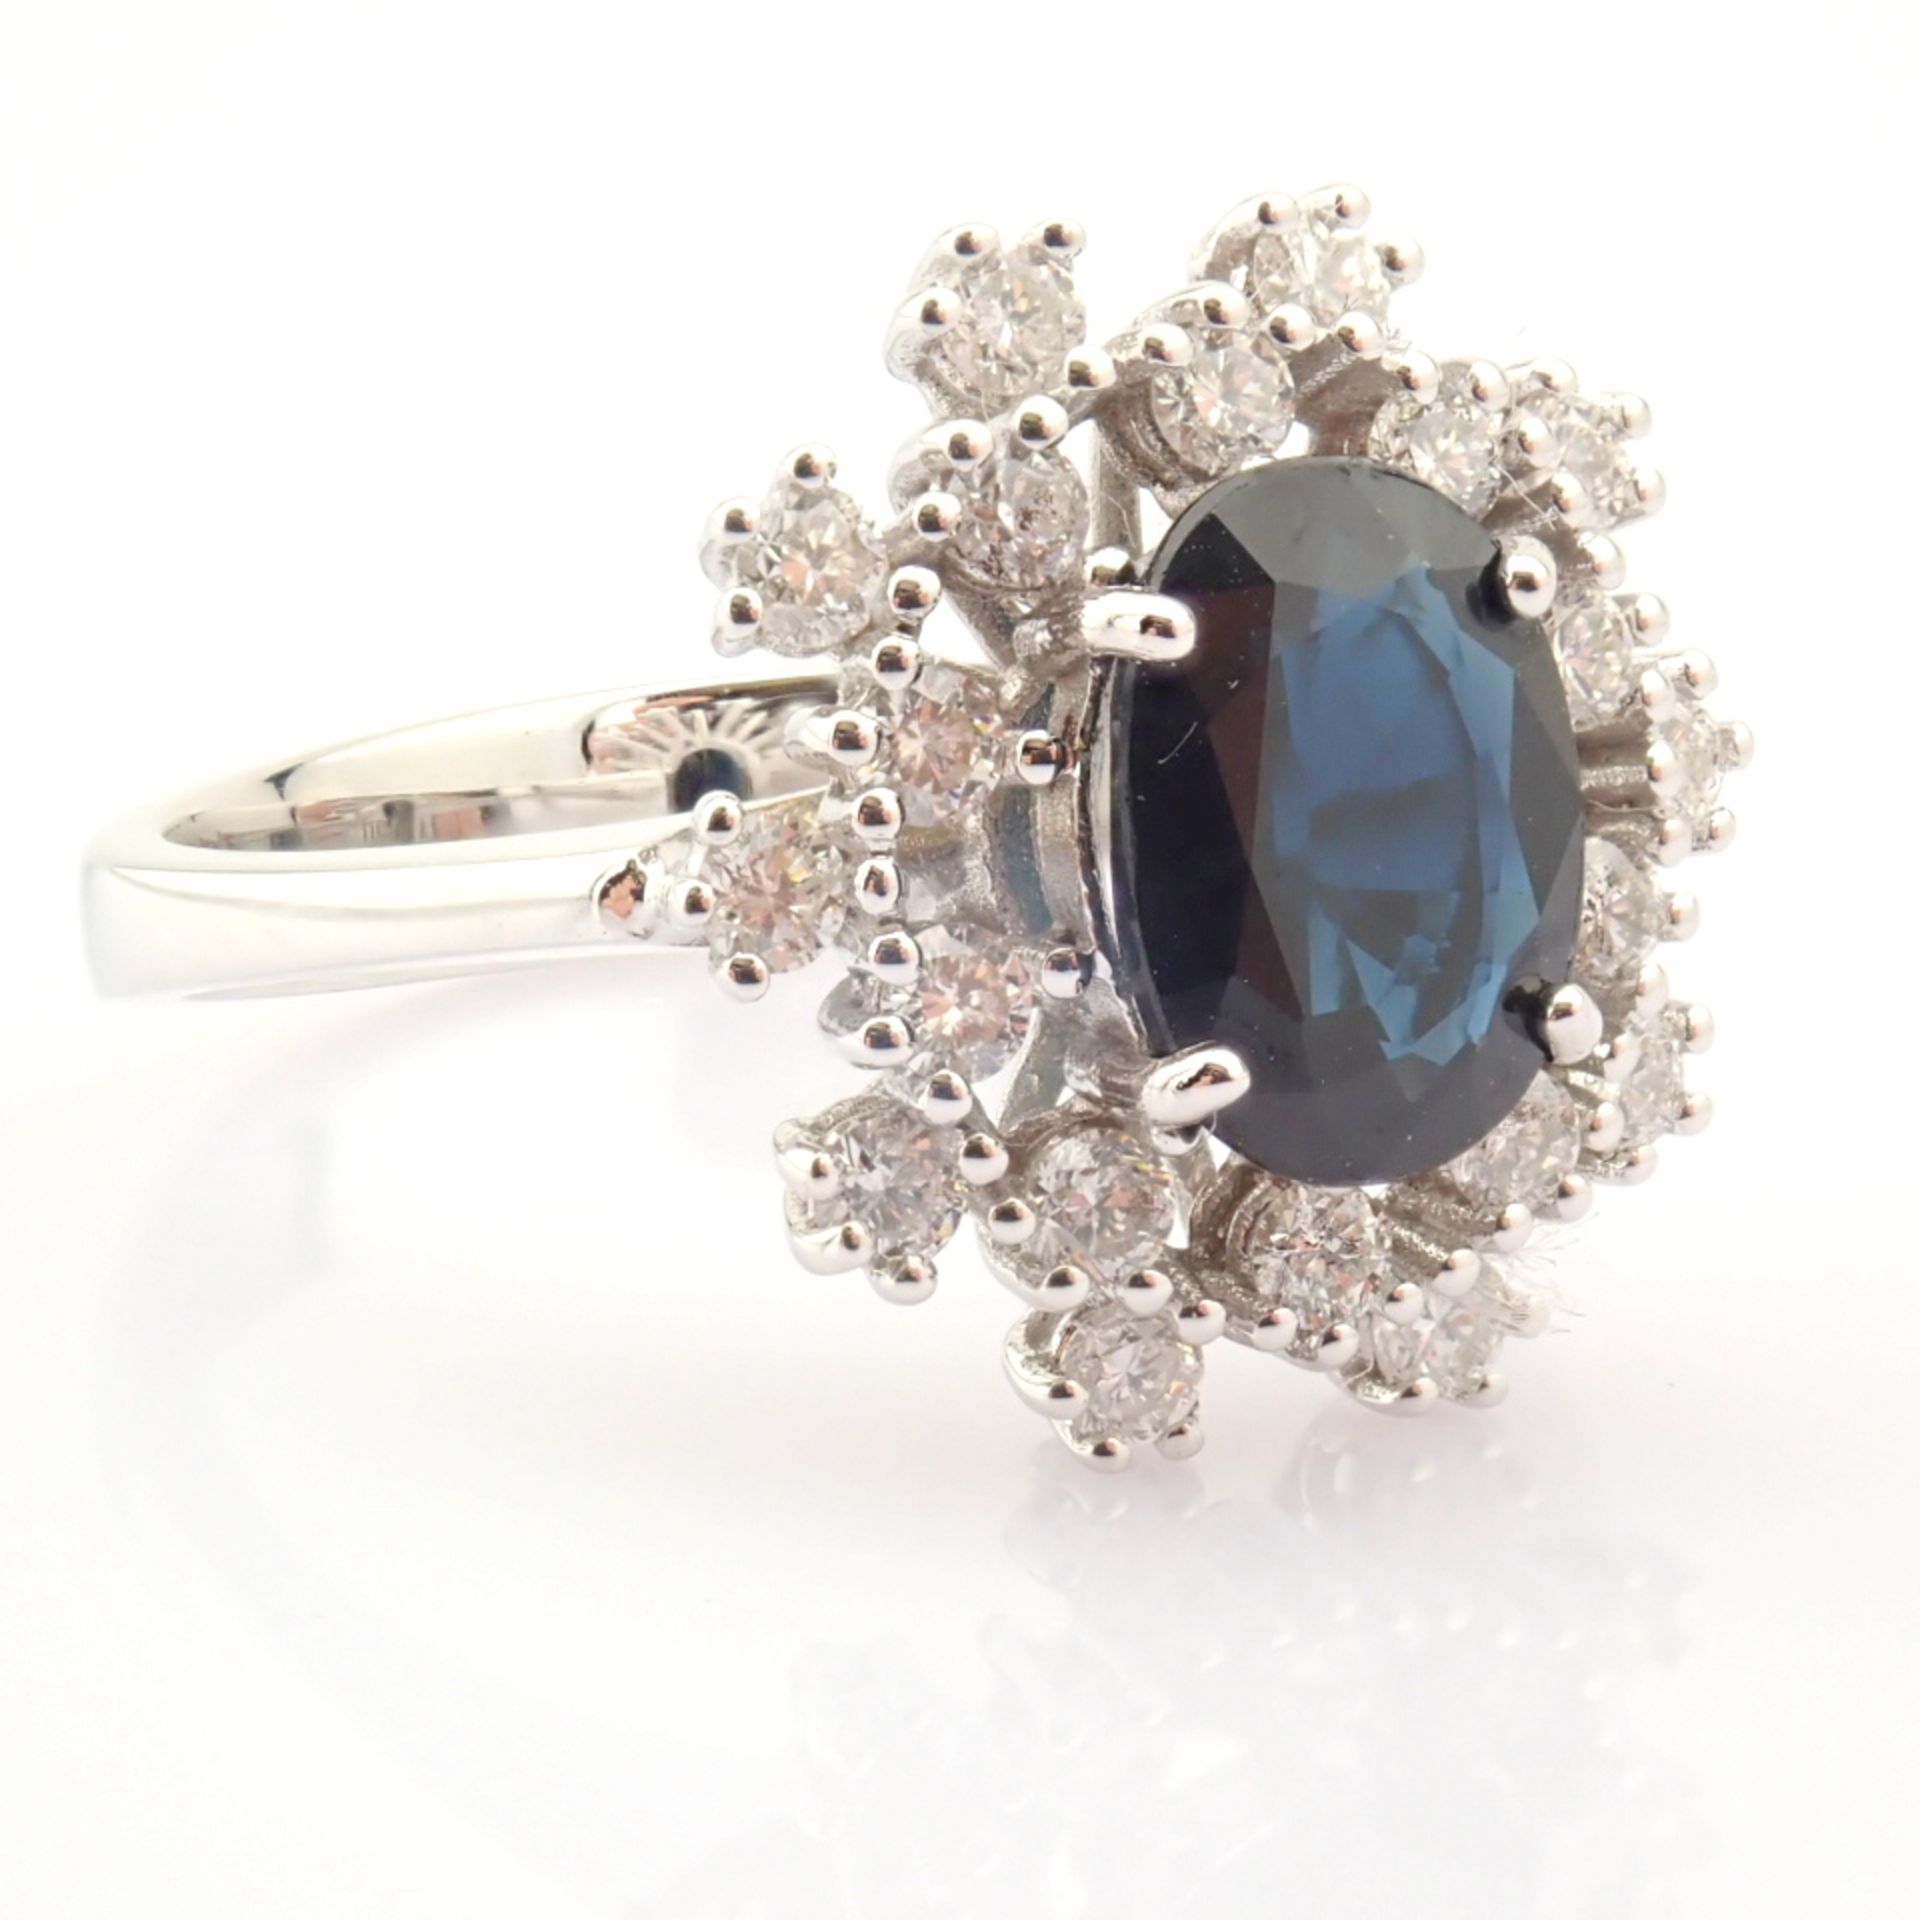 Certificated 18K White Gold Diamond & Sapphire Ring - Image 4 of 6